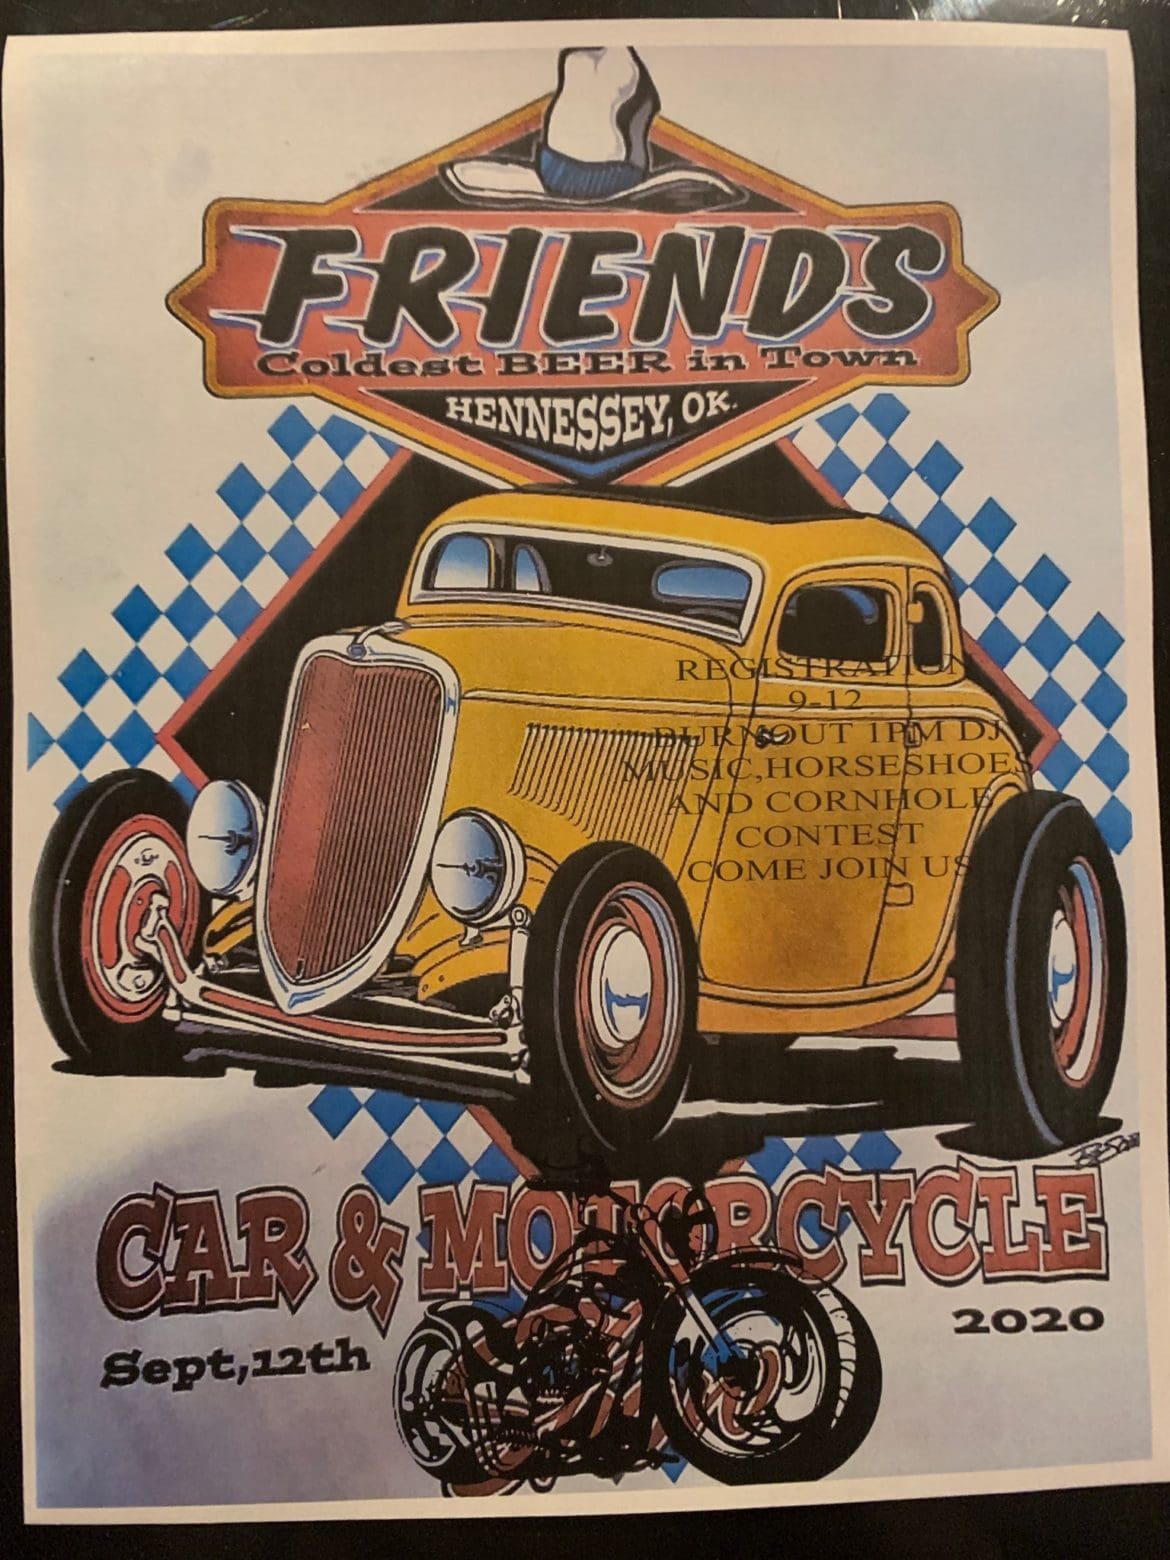 CAR AND MOTORCYCLE SHOW SEPTEMBER 12